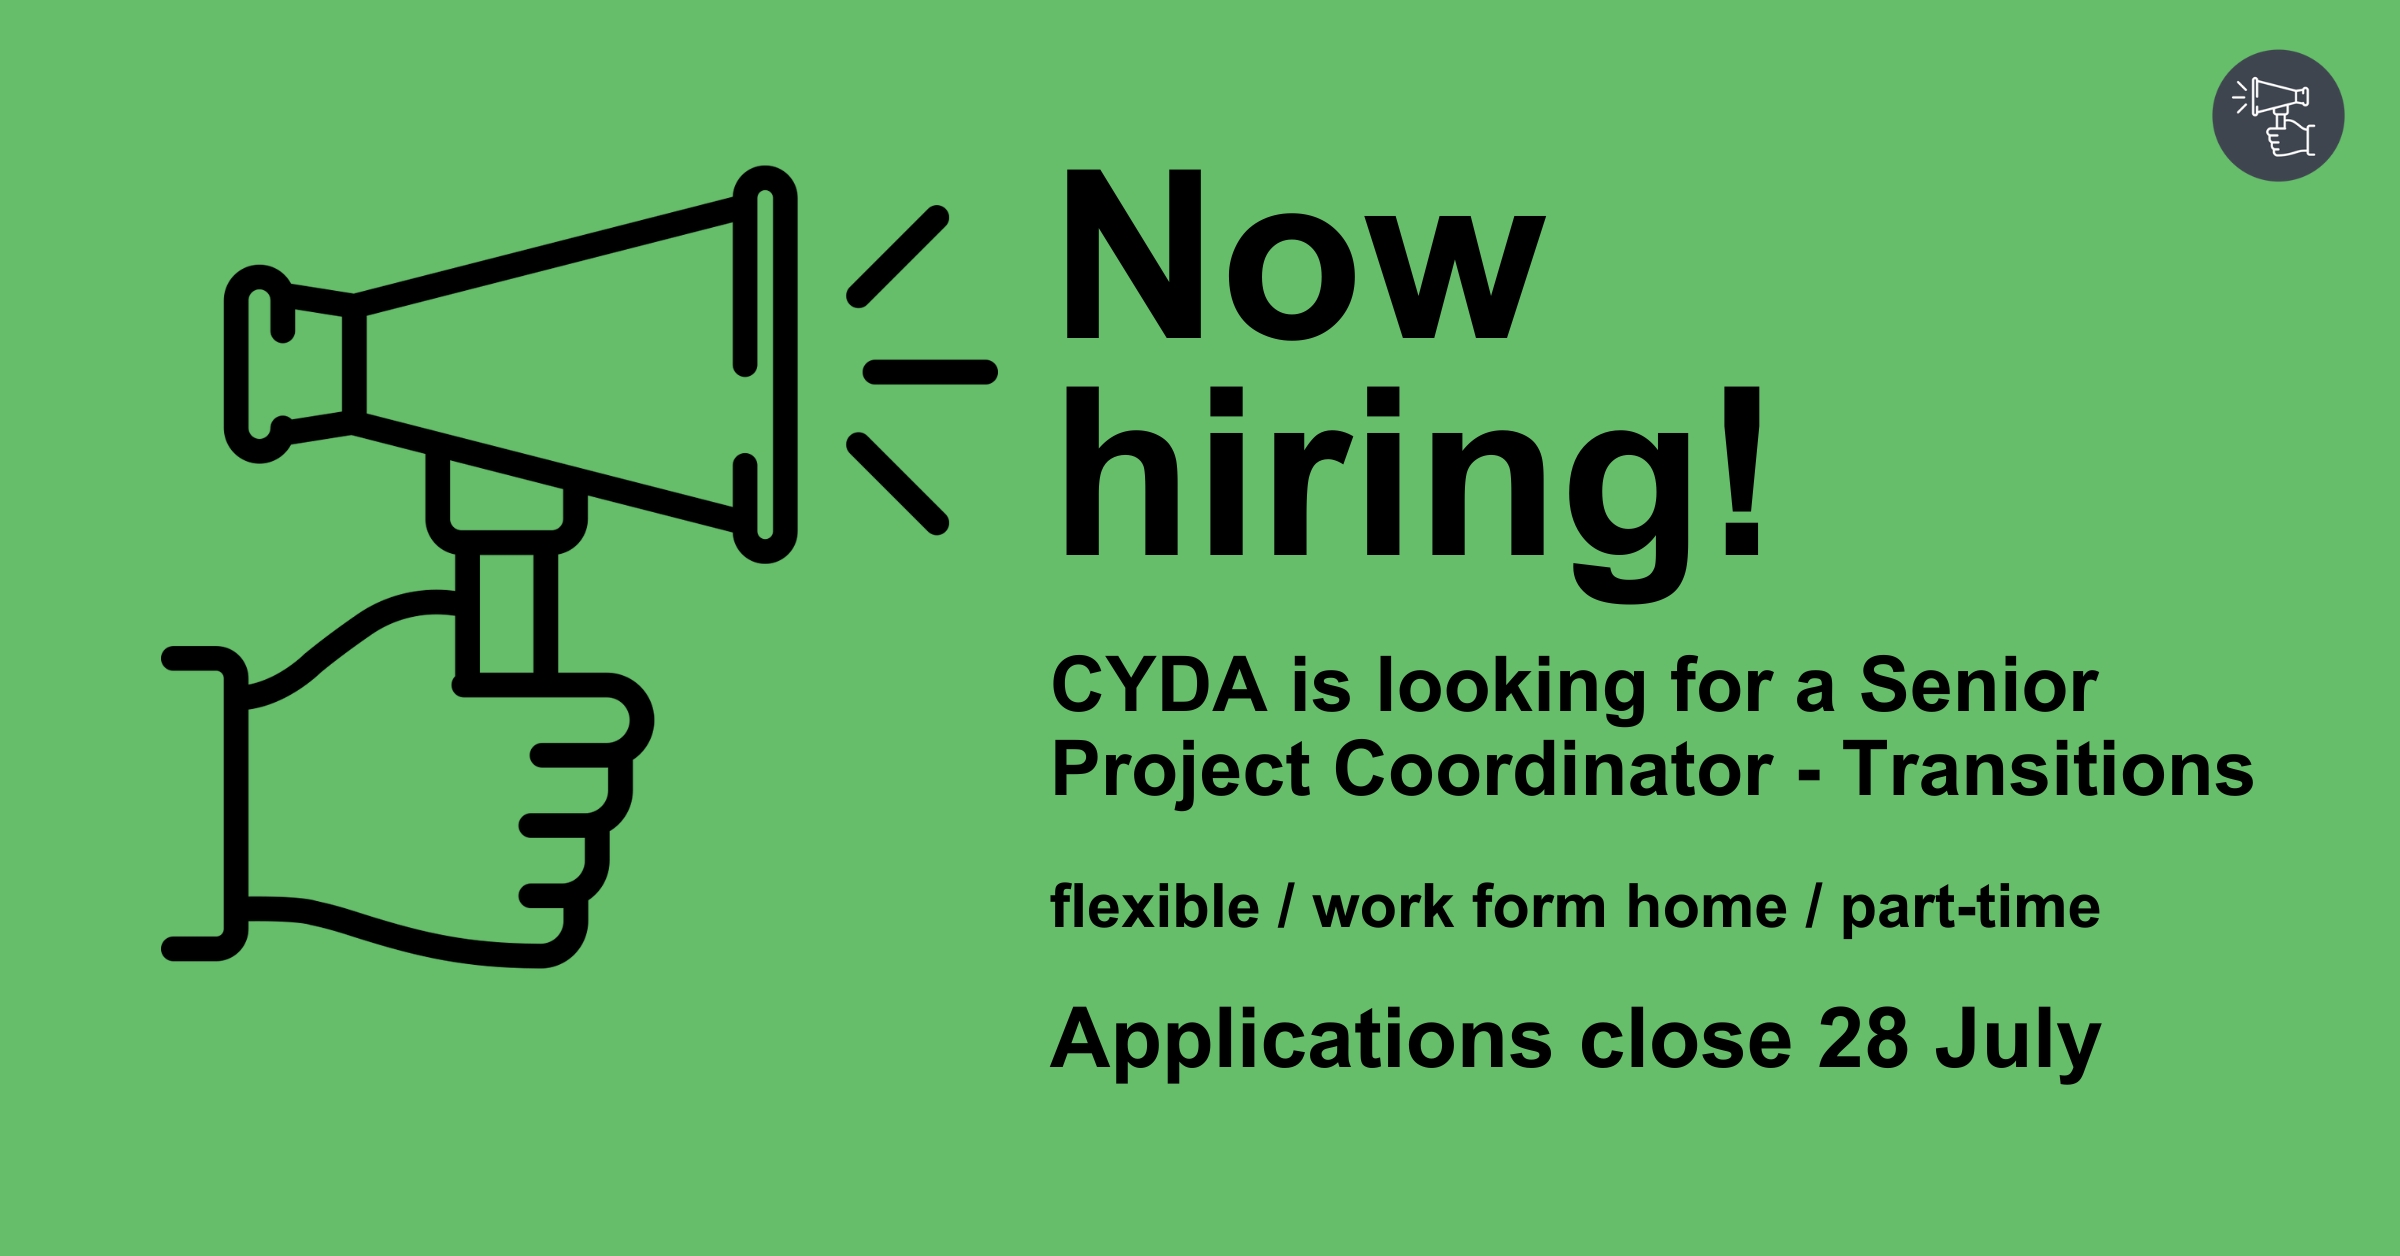 A megaphone on a green background with text reading "Now hiring! CYDA is looking for a Senior Project Coordinator - Transitions. flexible/work from home/part-time. Applications close 28 July".